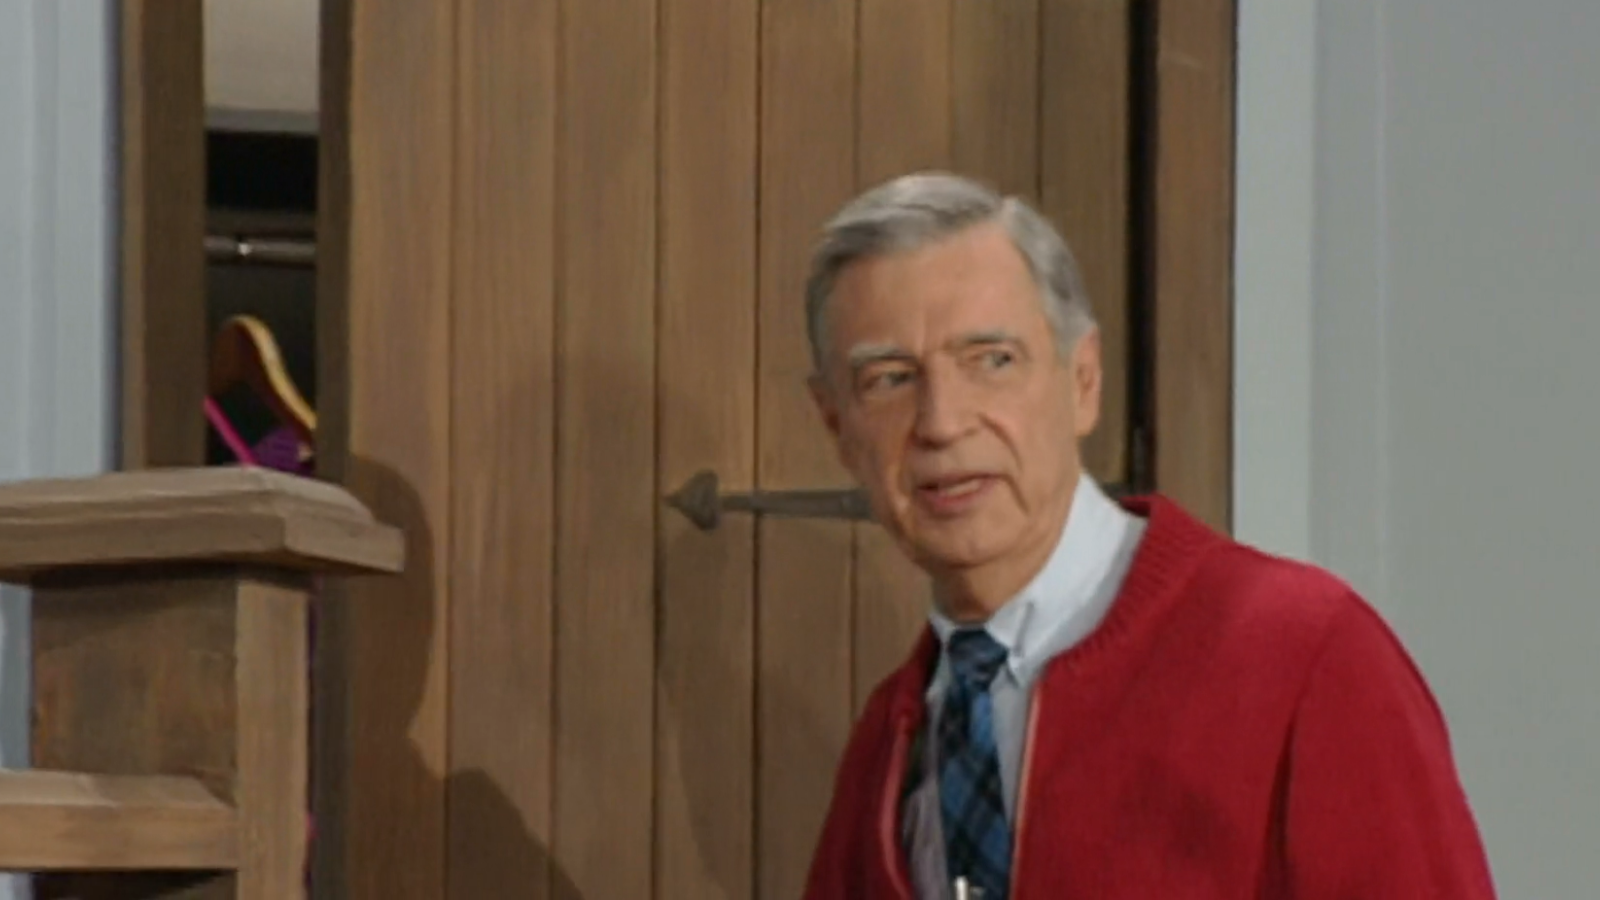 Won't You Be My Neighbor? Movie Review